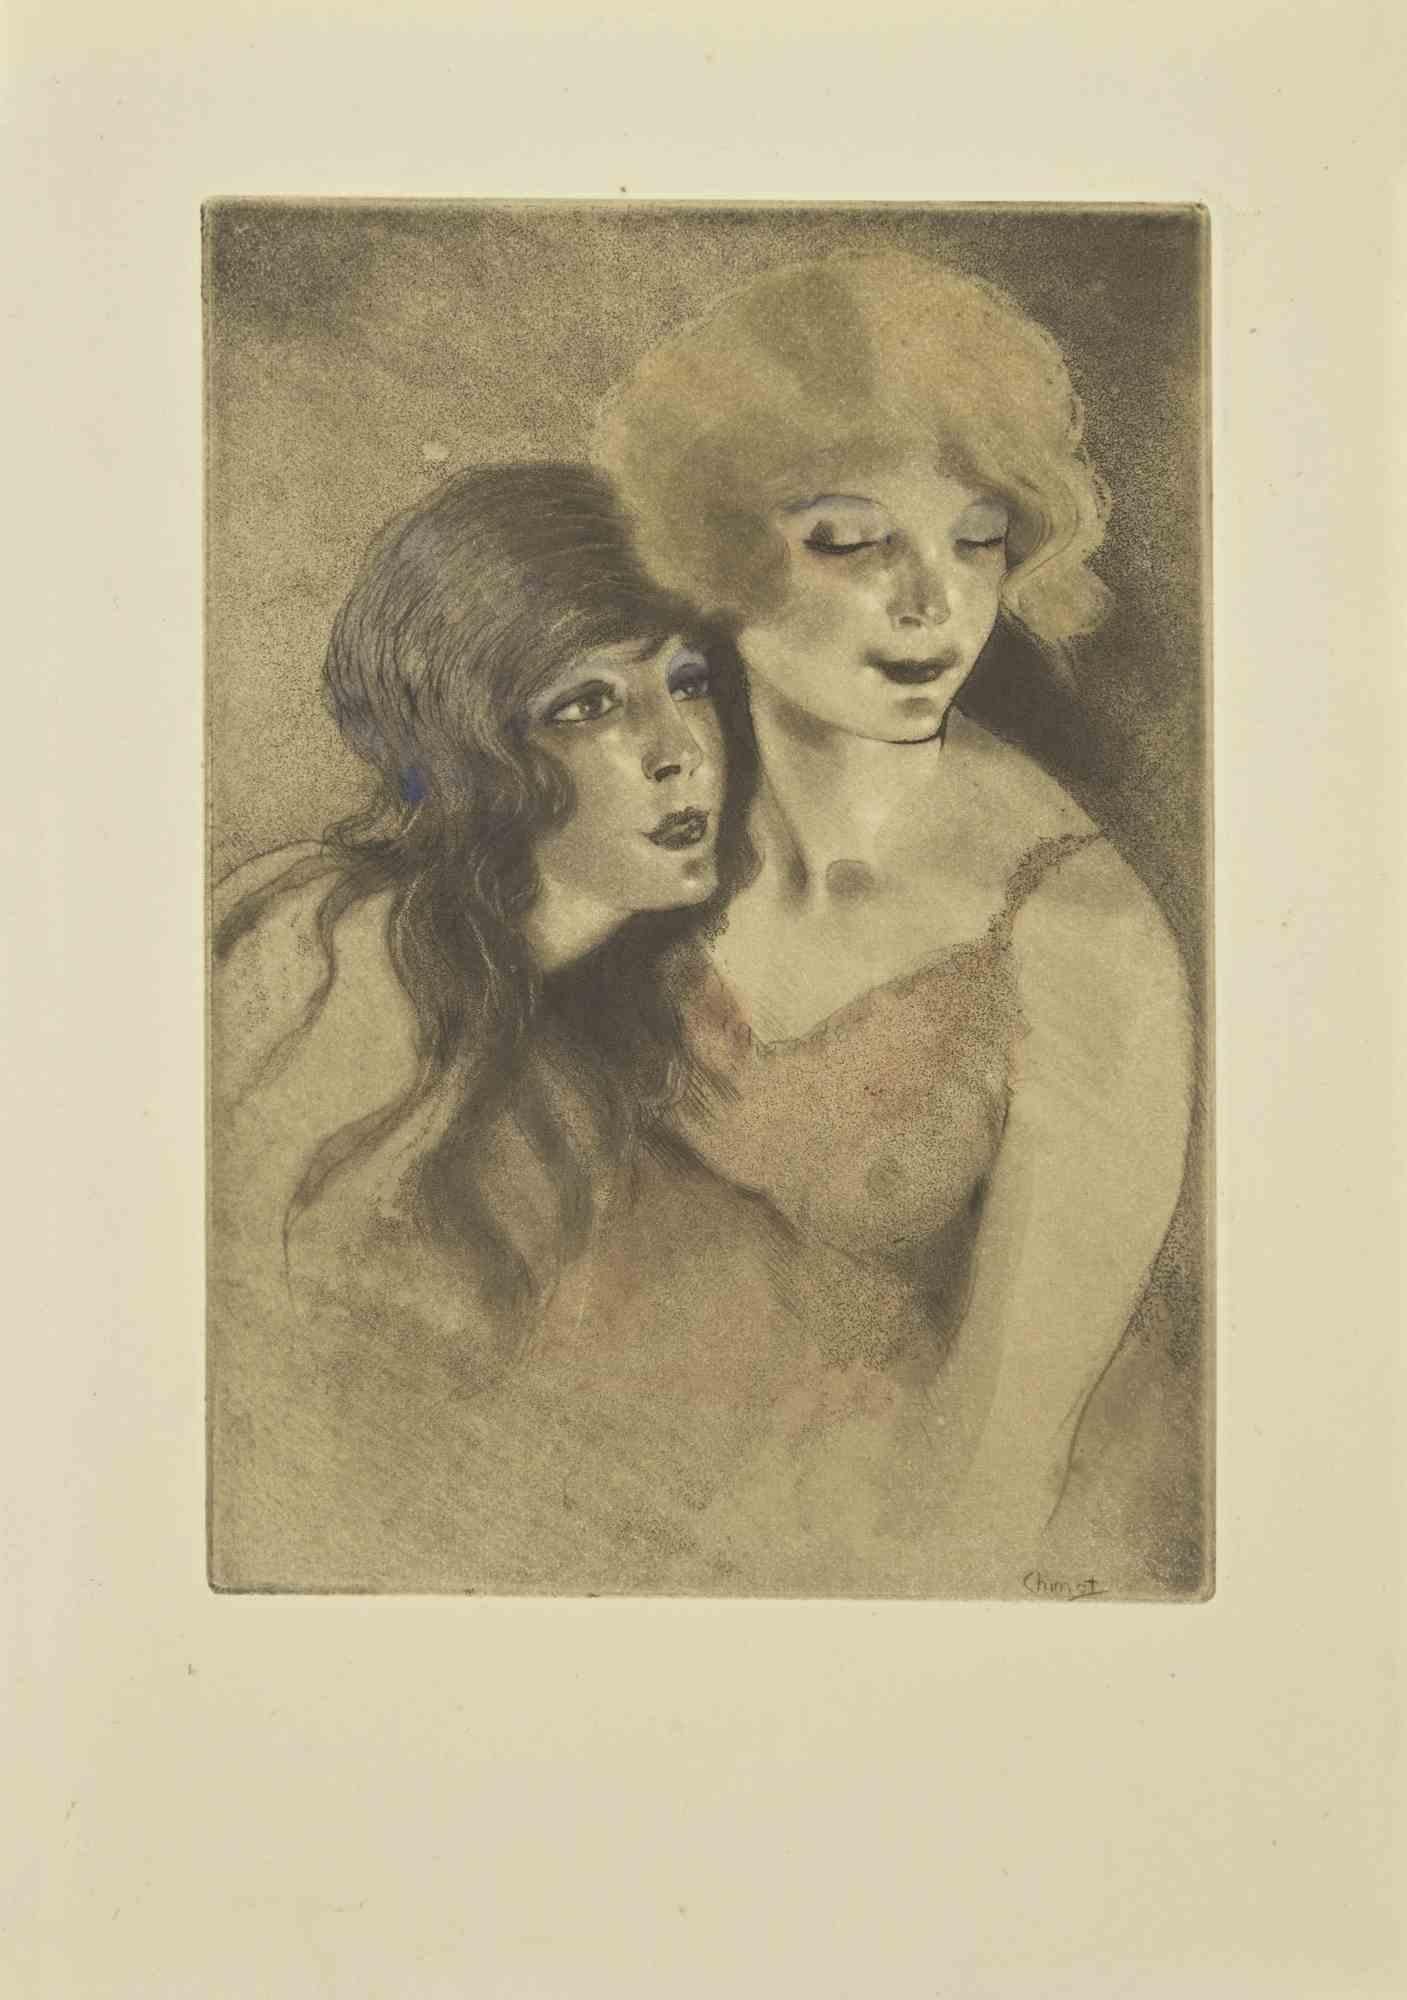 Friends is an etching realized by Edouard Chimot in the 1930s.

Signed on the plate by the artist on the lower right corner.

Good conditions.

Édouard Chimot (26 November 1880 – 7 June 1959) was a French artist, illustrator, and editor whose career